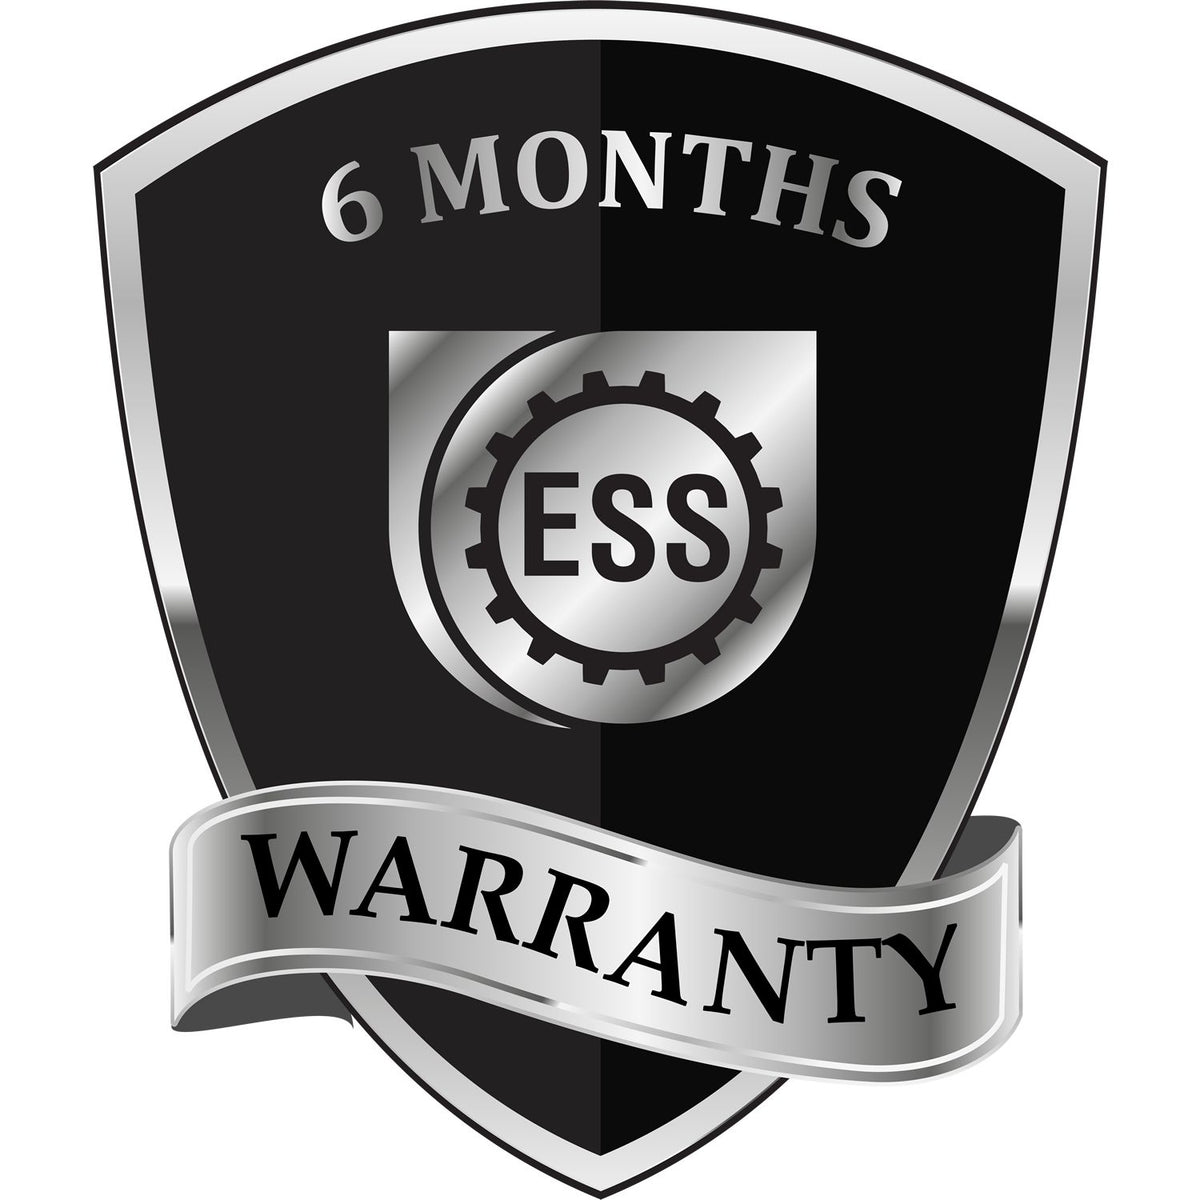 A badge or emblem showing a warranty icon for the PSI Georgia Notary Stamp